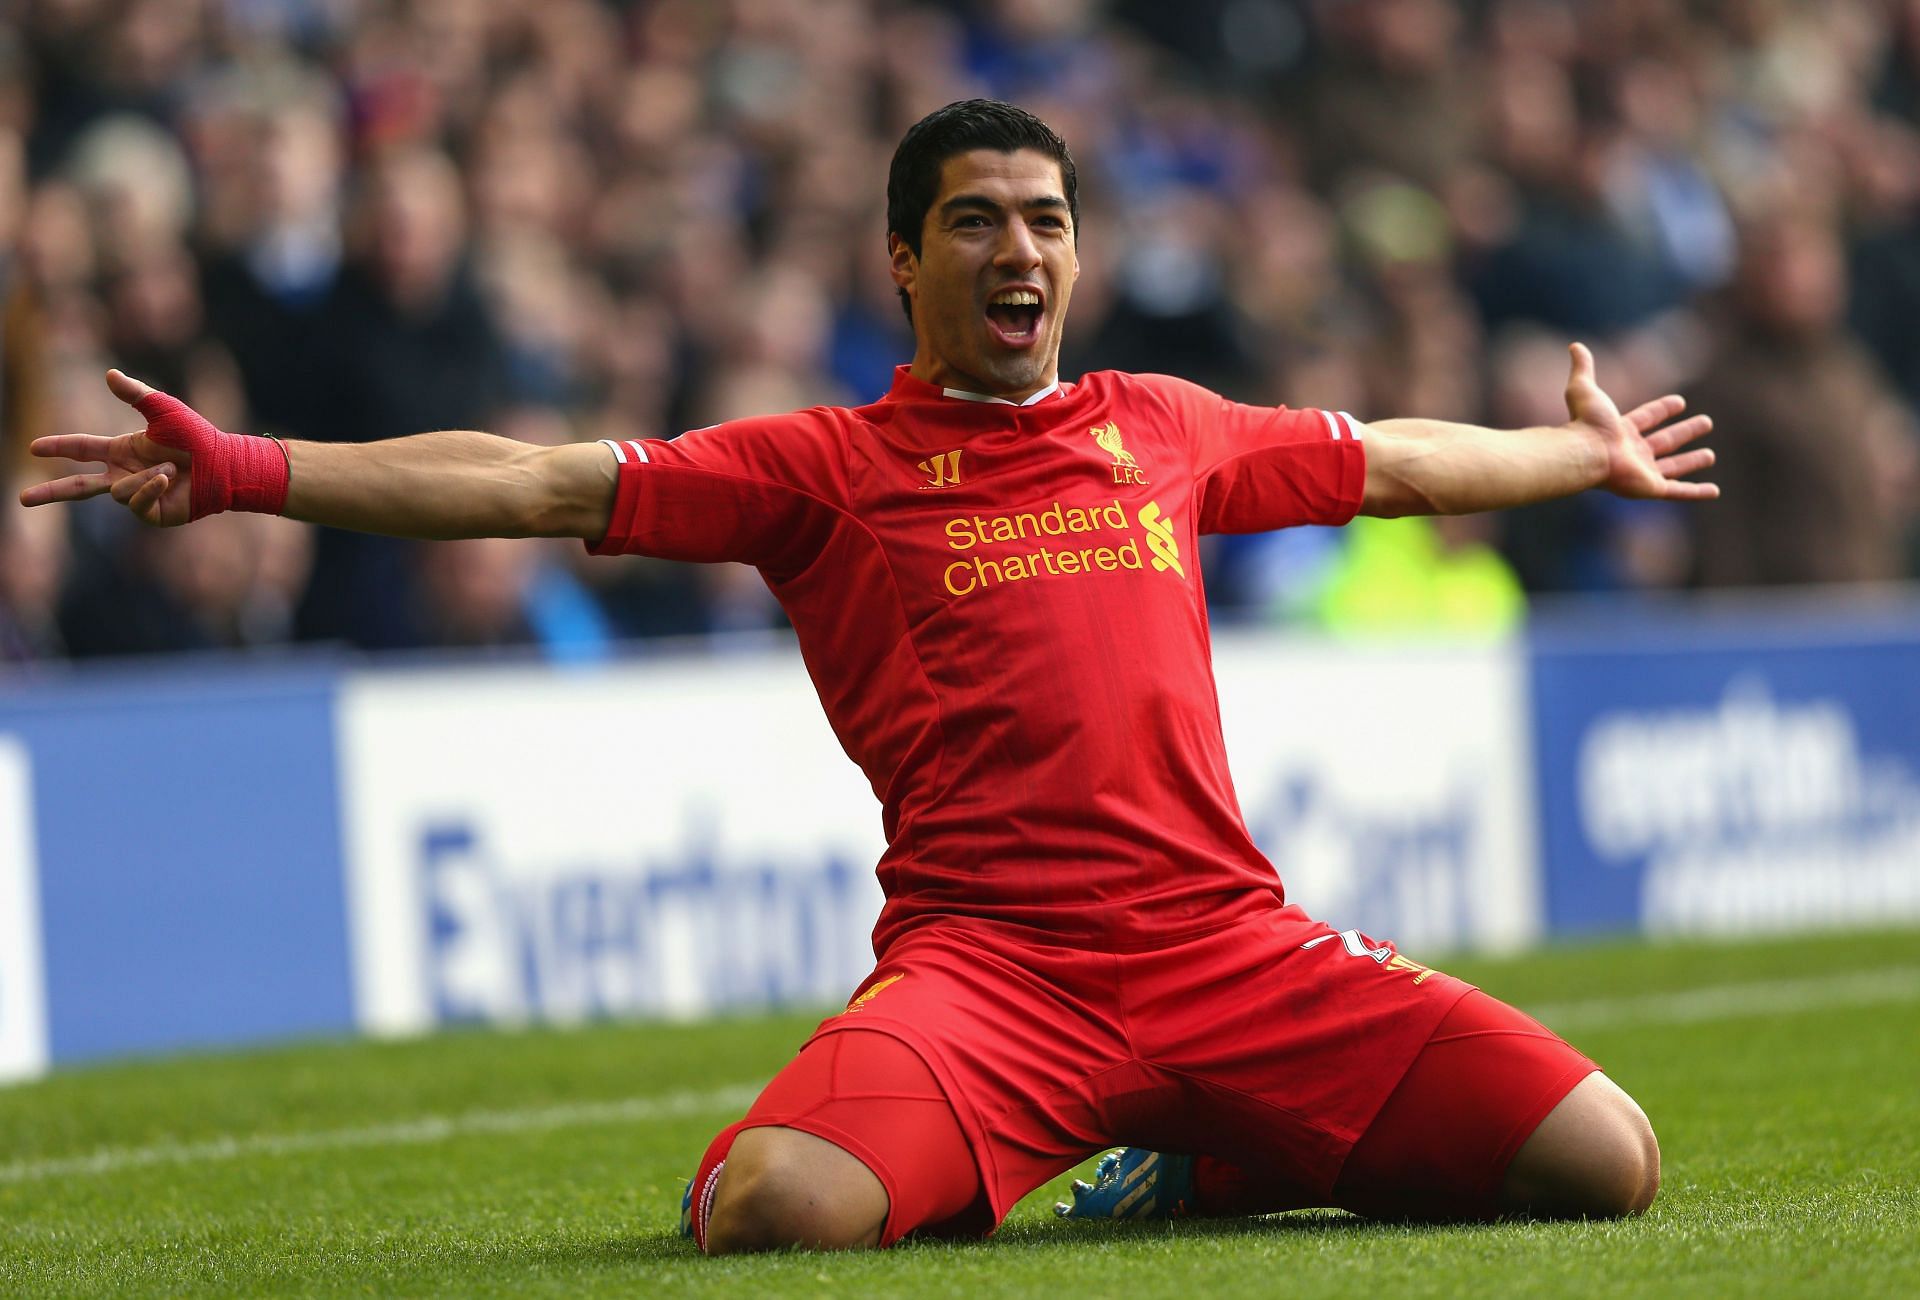 Luis Suarez enjoyed an excellent spell with Liverpool